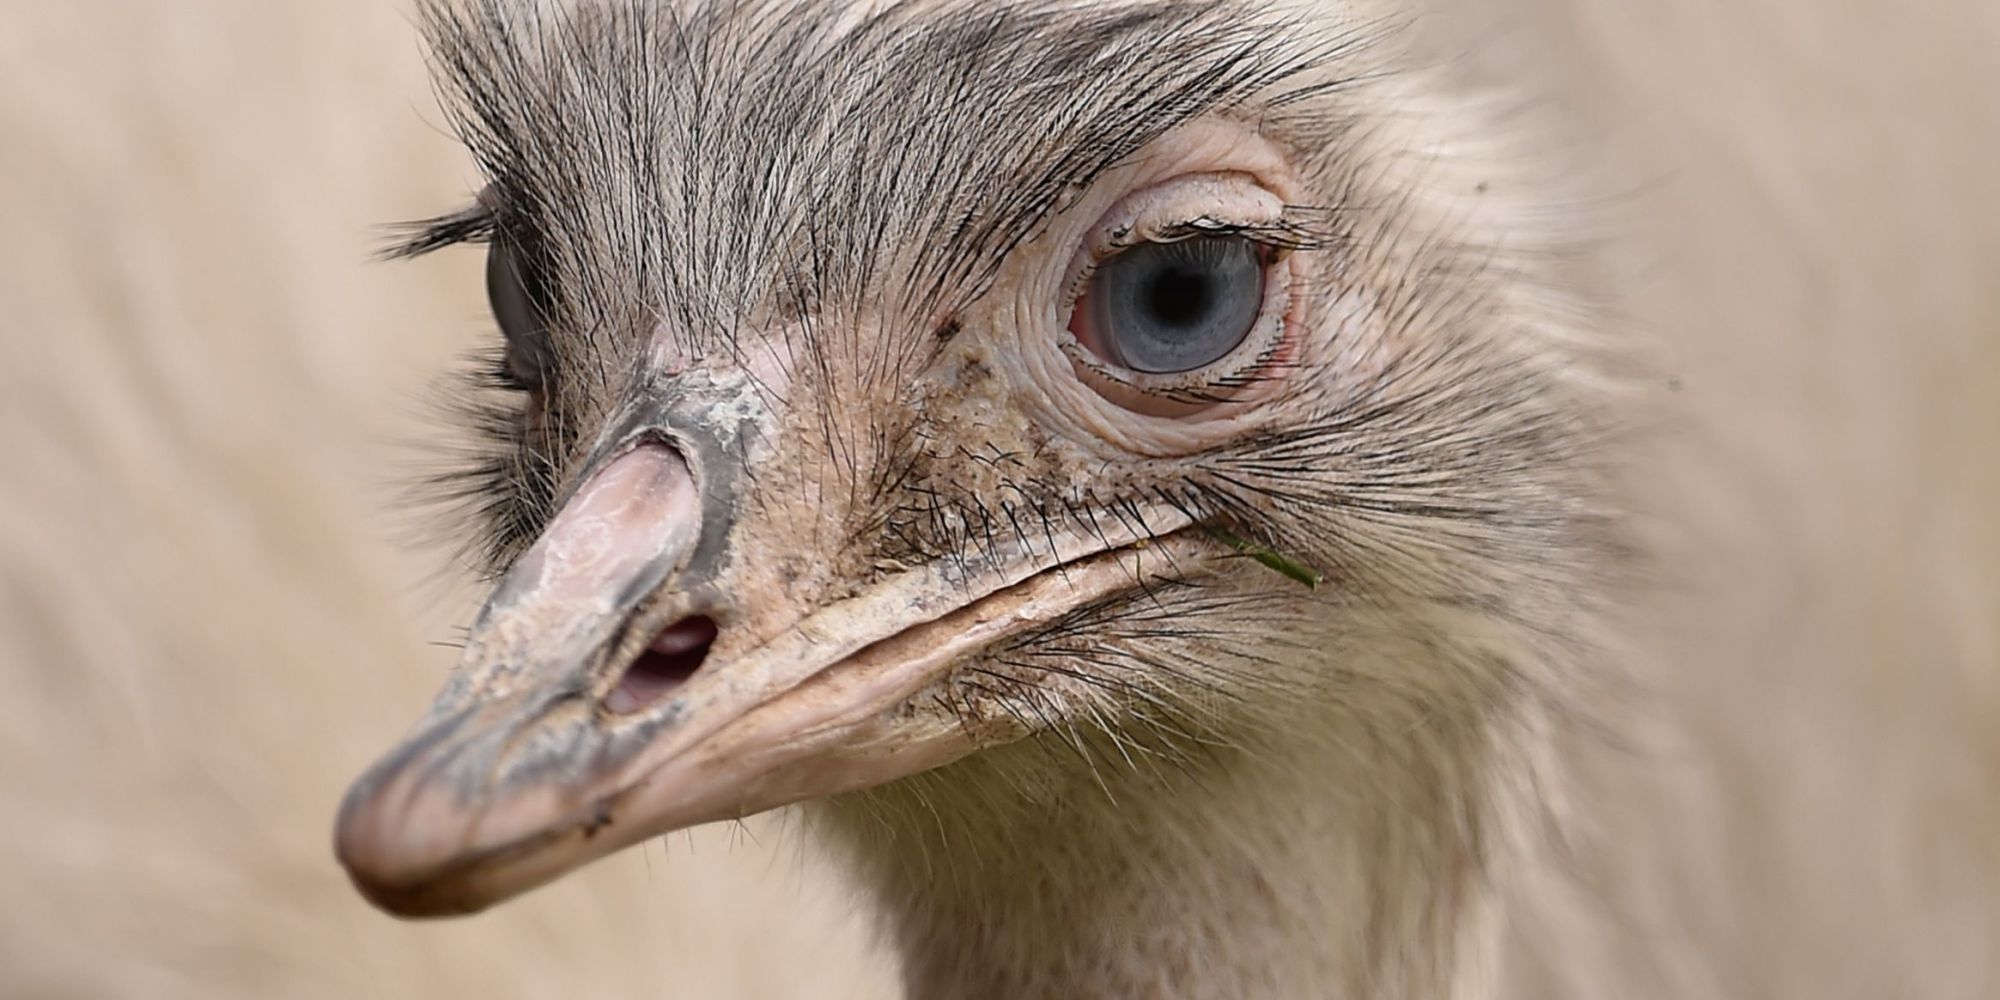 Escaped Giant Rhea Bird Can Disembowel A Human With One Strike ...